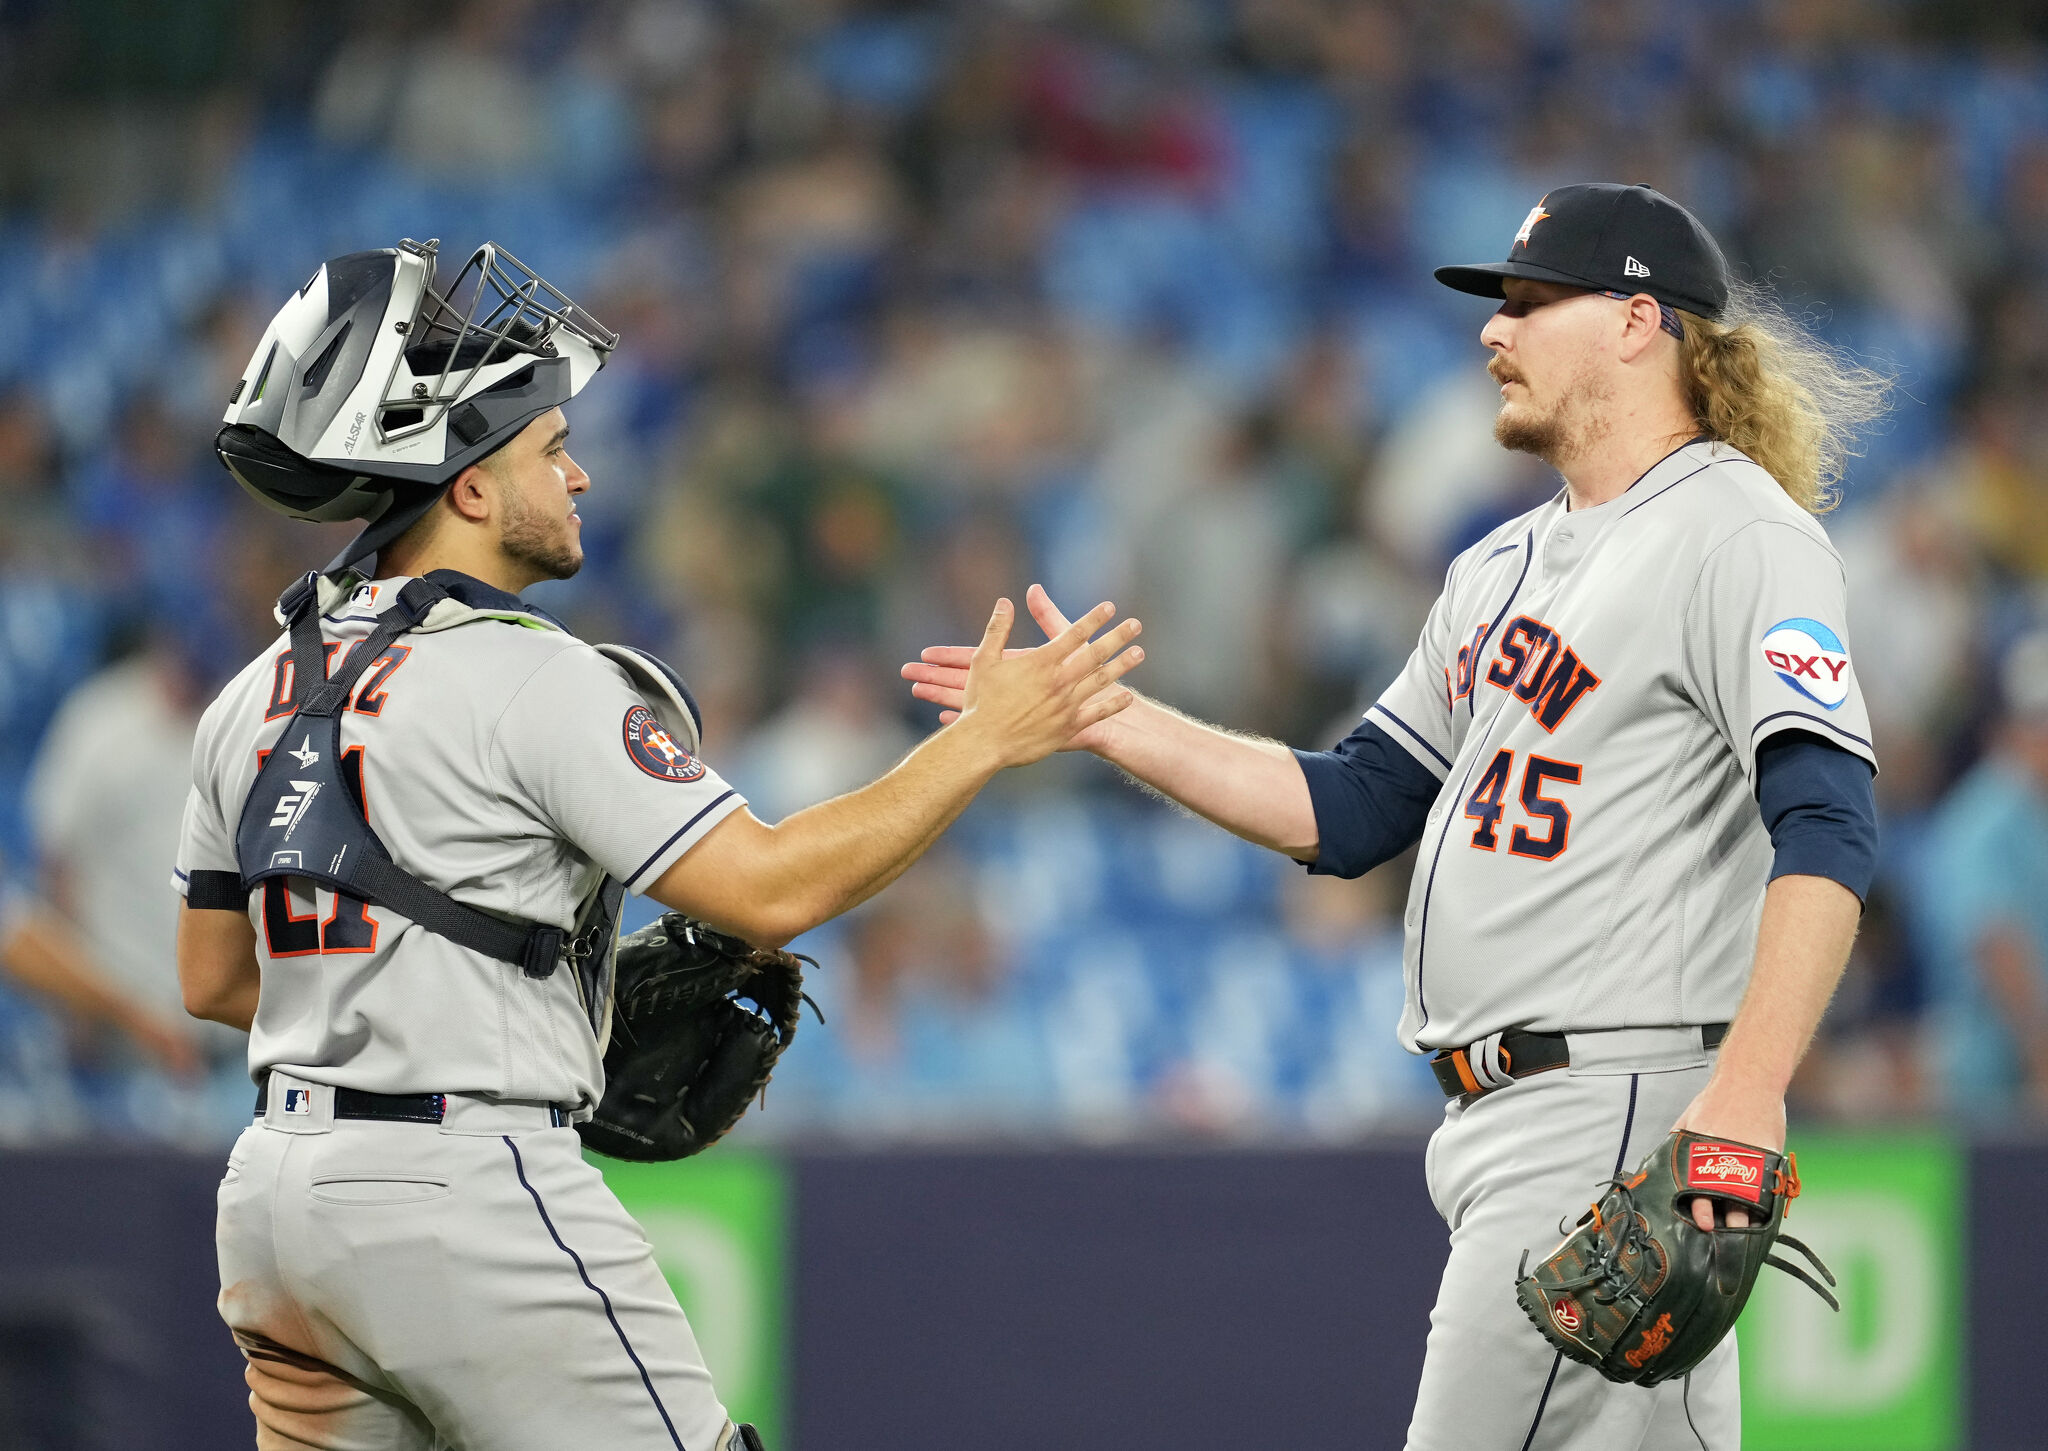 Stanek Advances to World Series with Astros